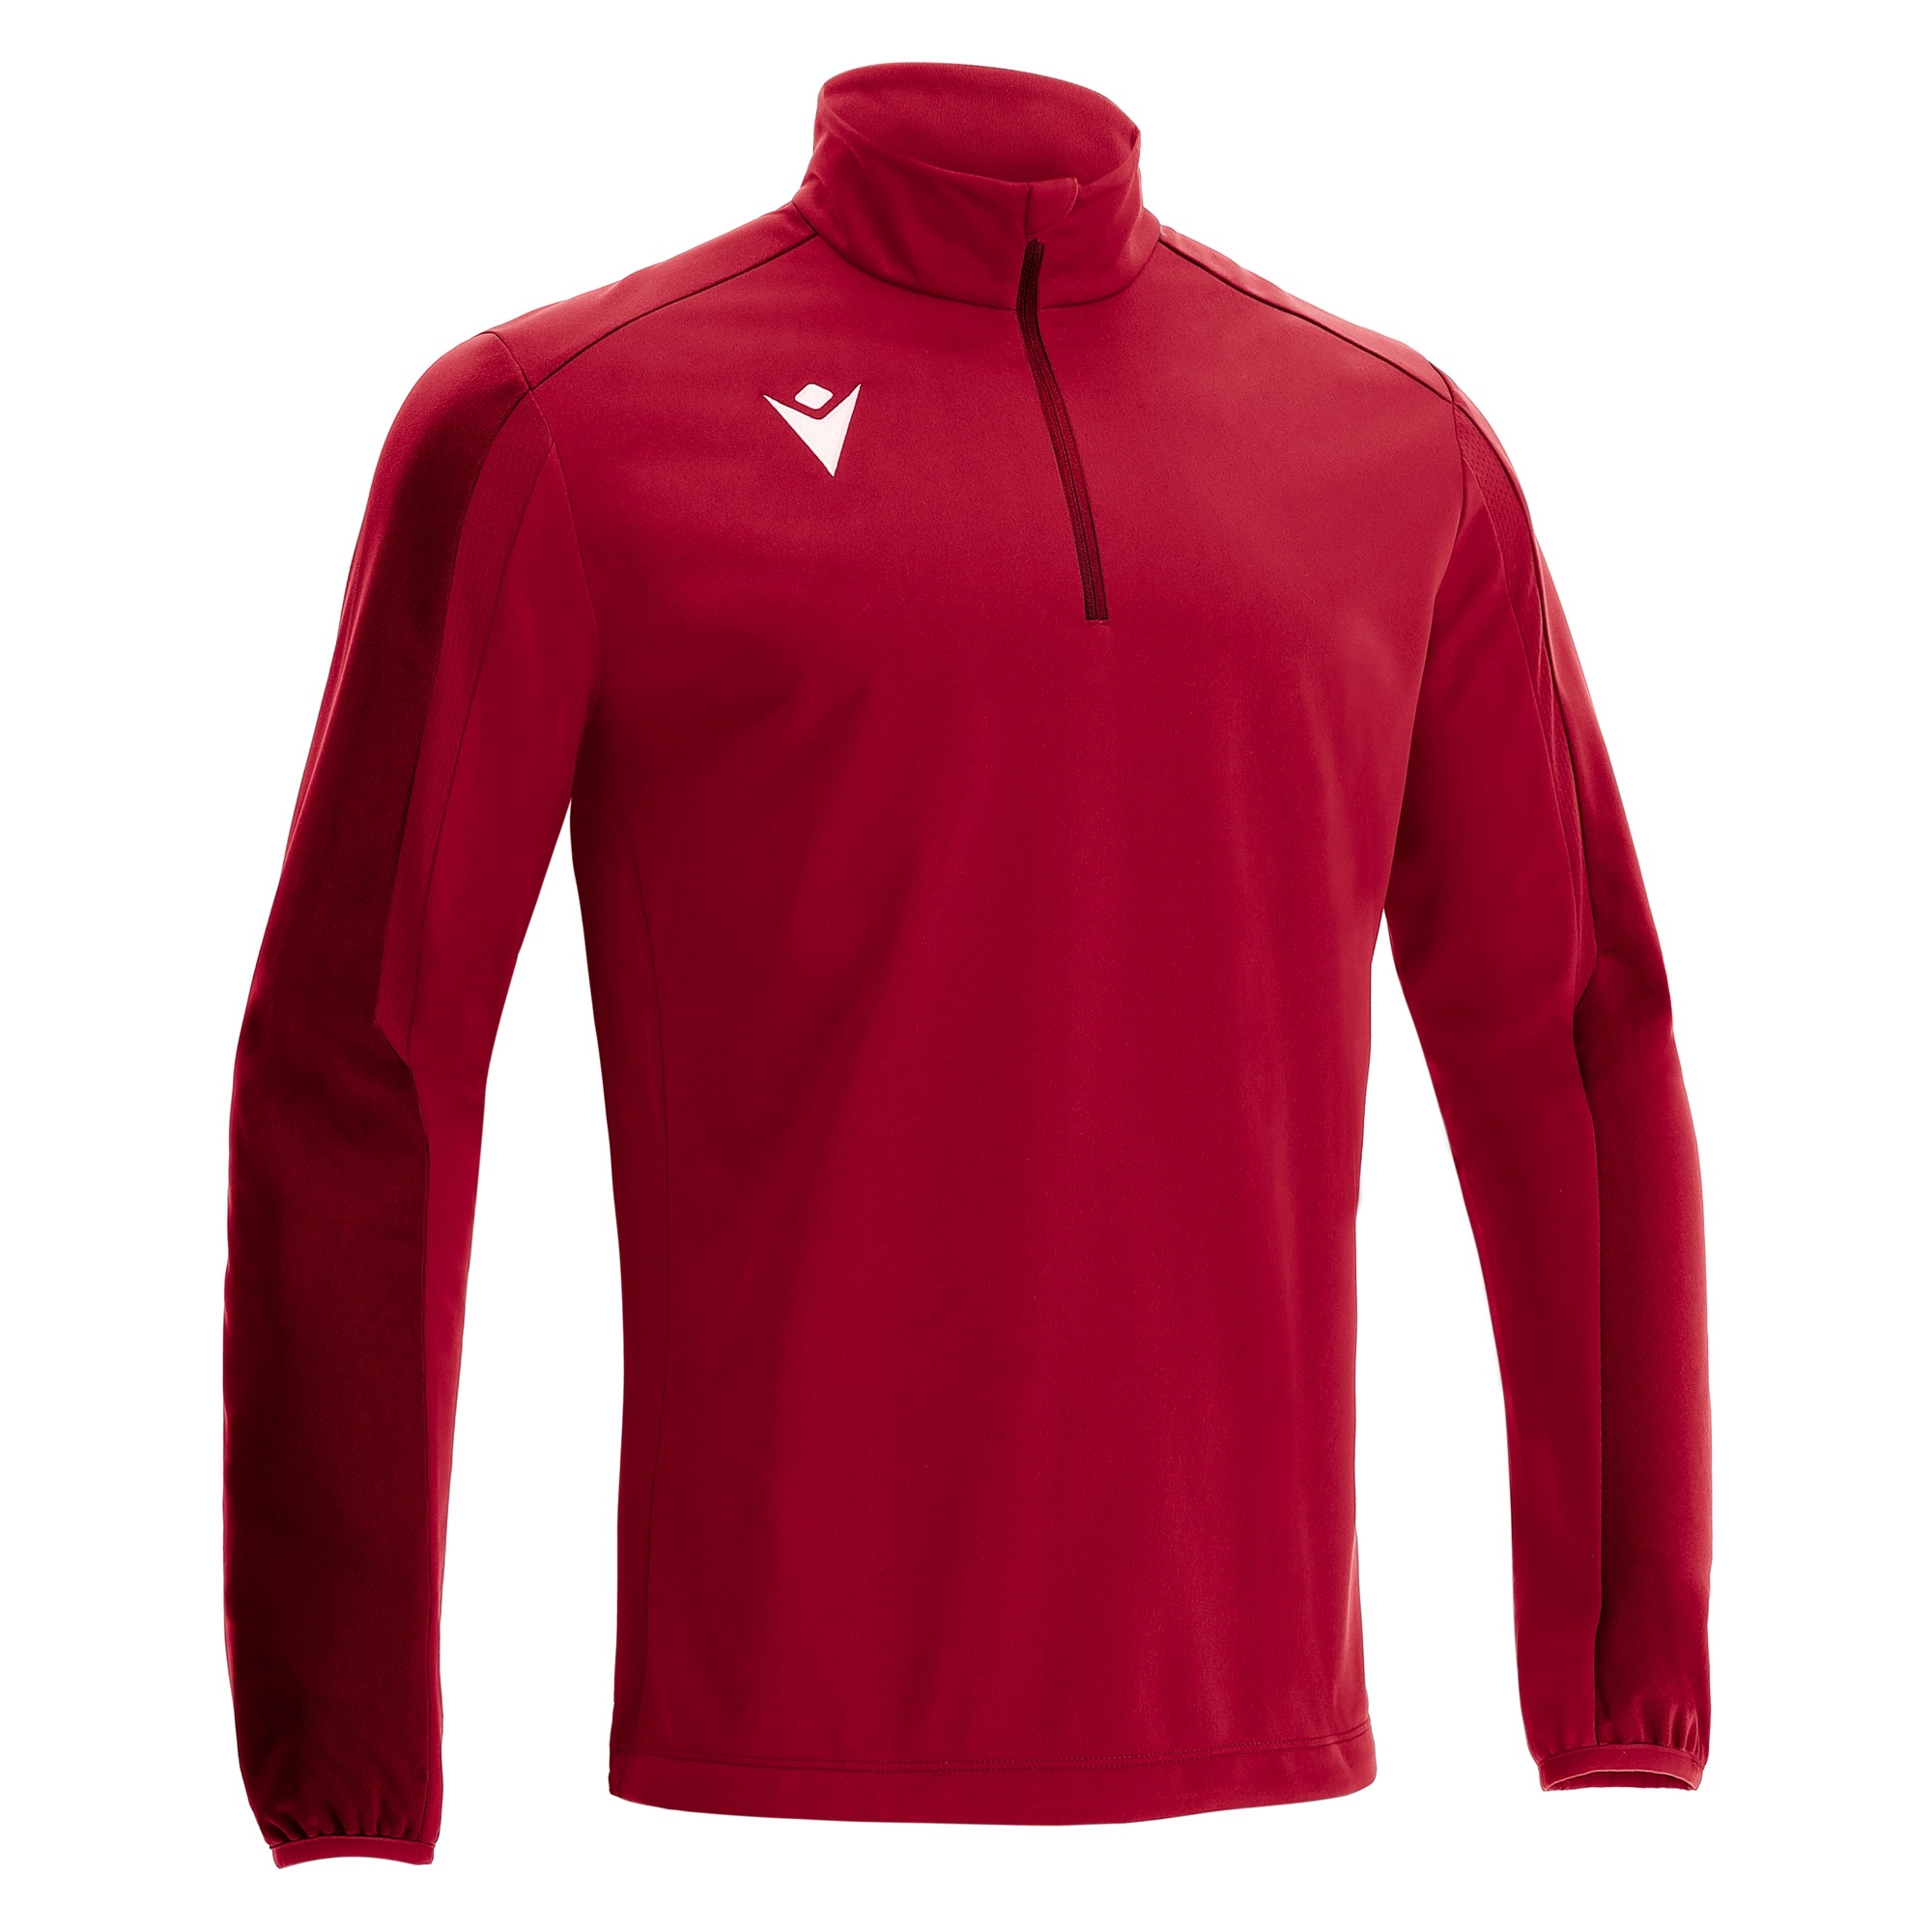 ARNO 1/4 ZIP TOP RED/DRED ,S Macron.rs